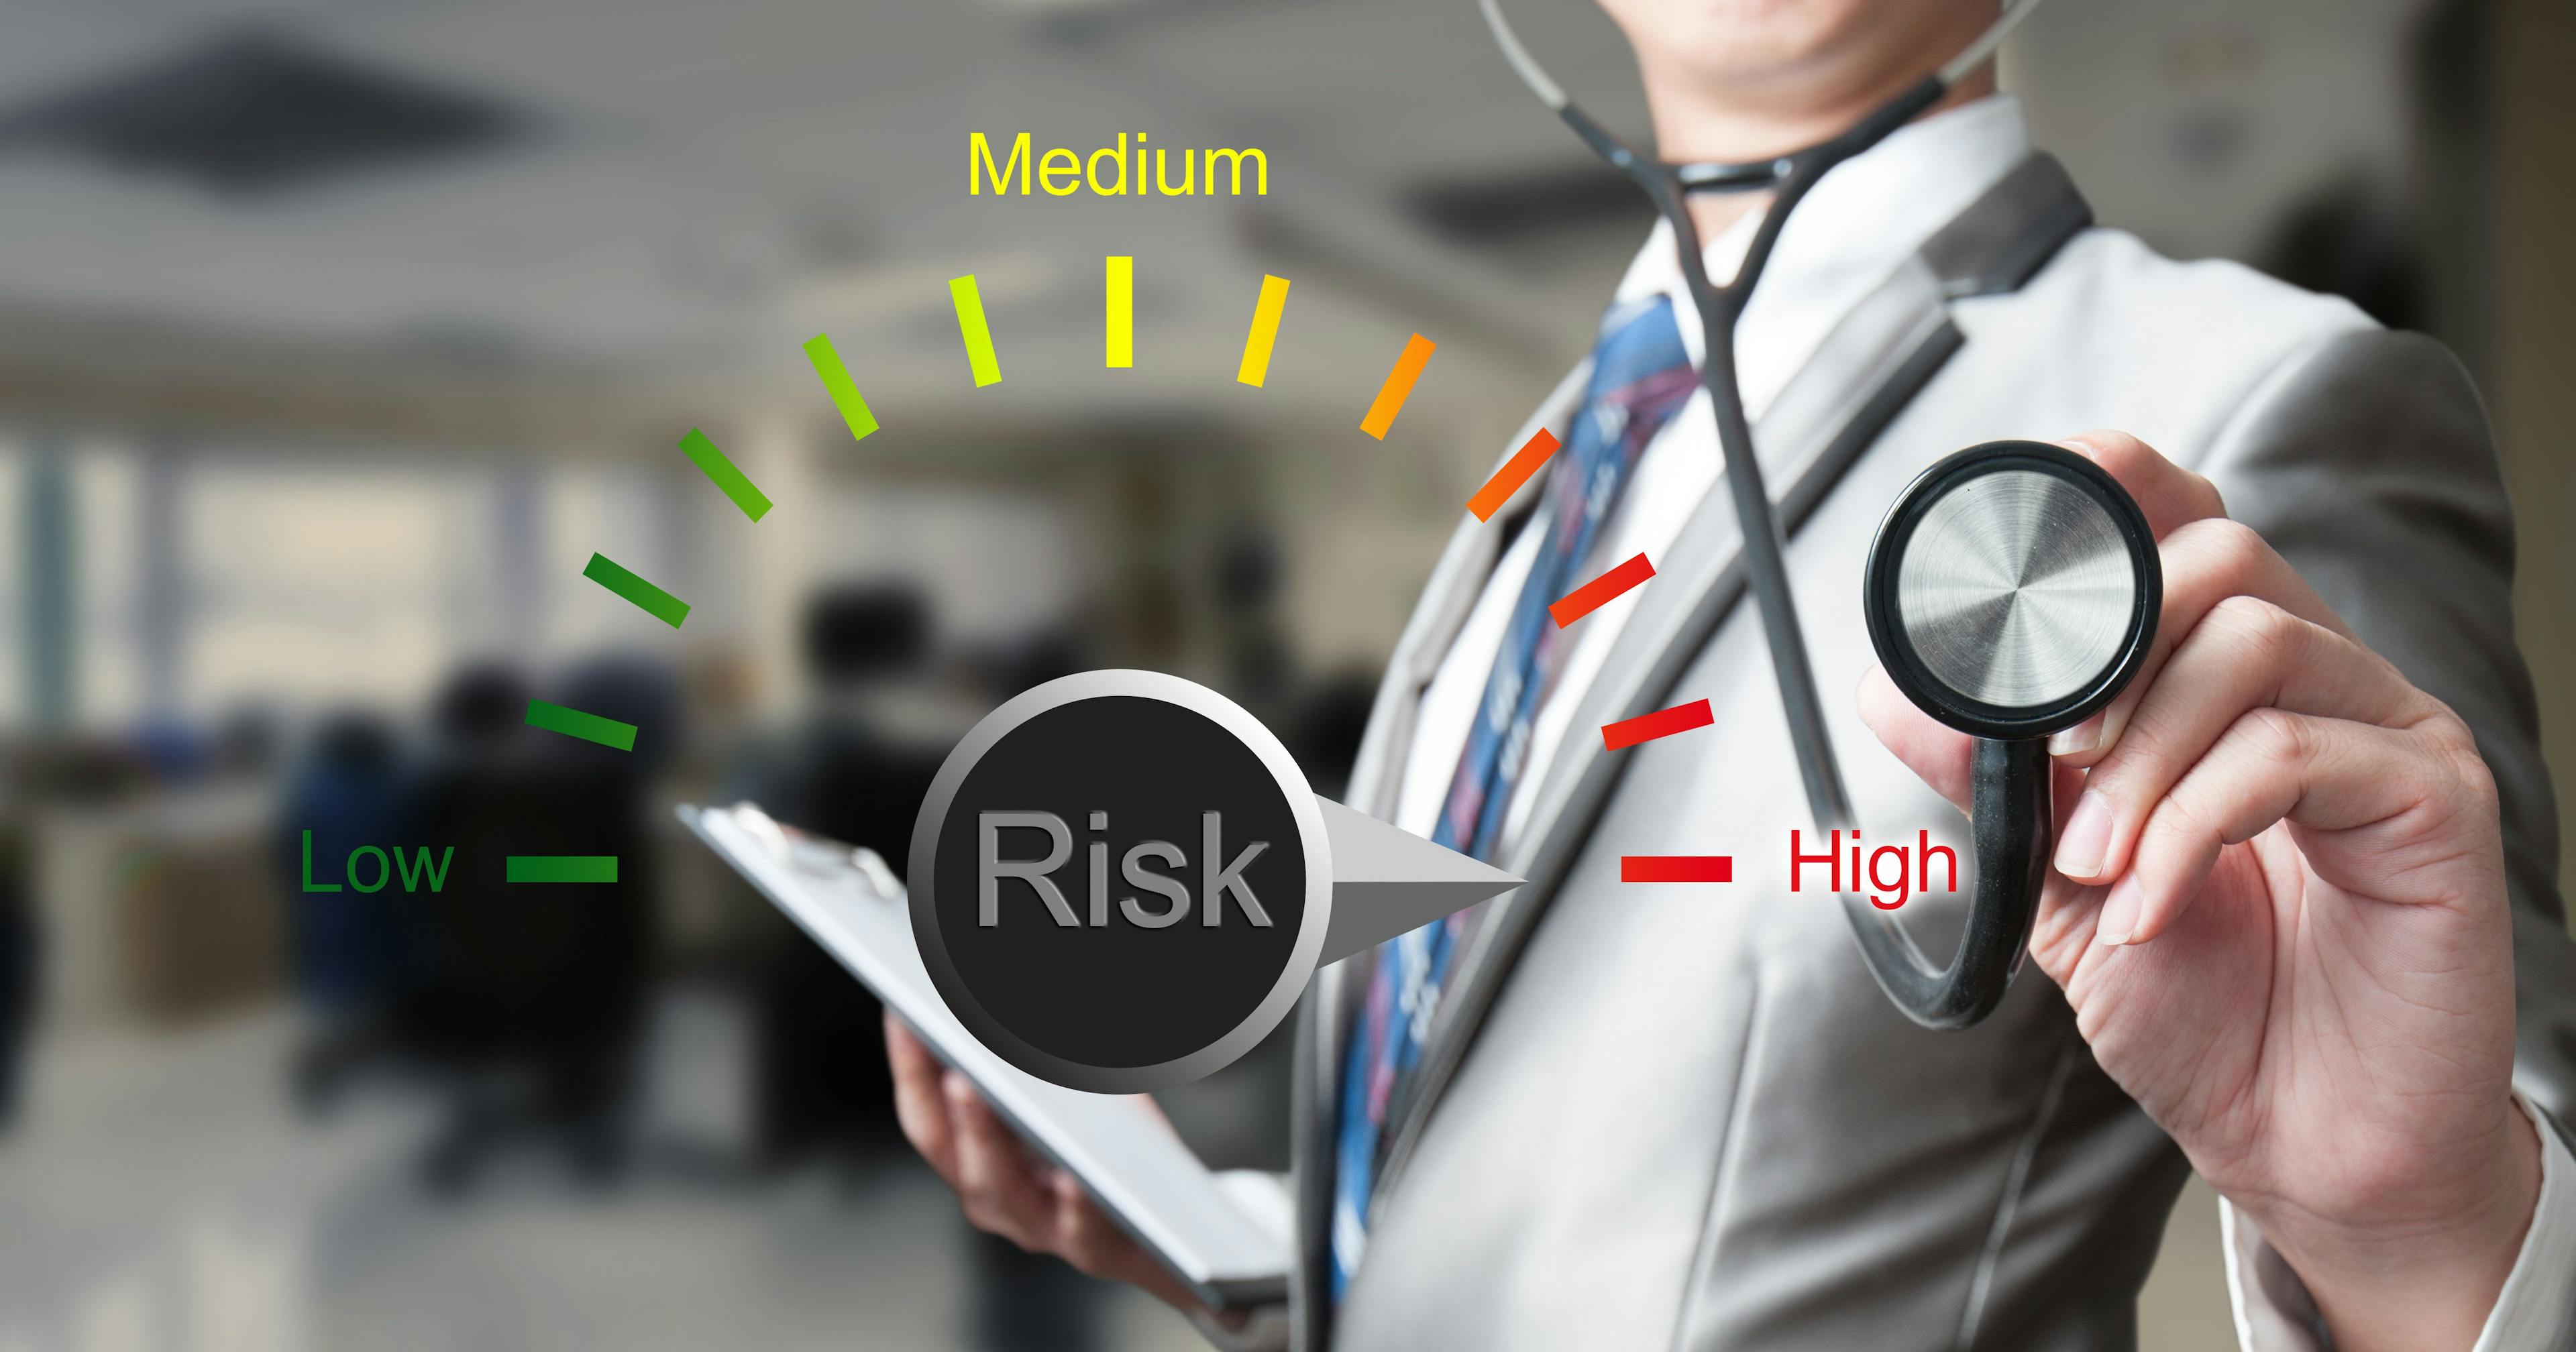 How to help at-risk patients: ©stnazkul - stock.adobe.com